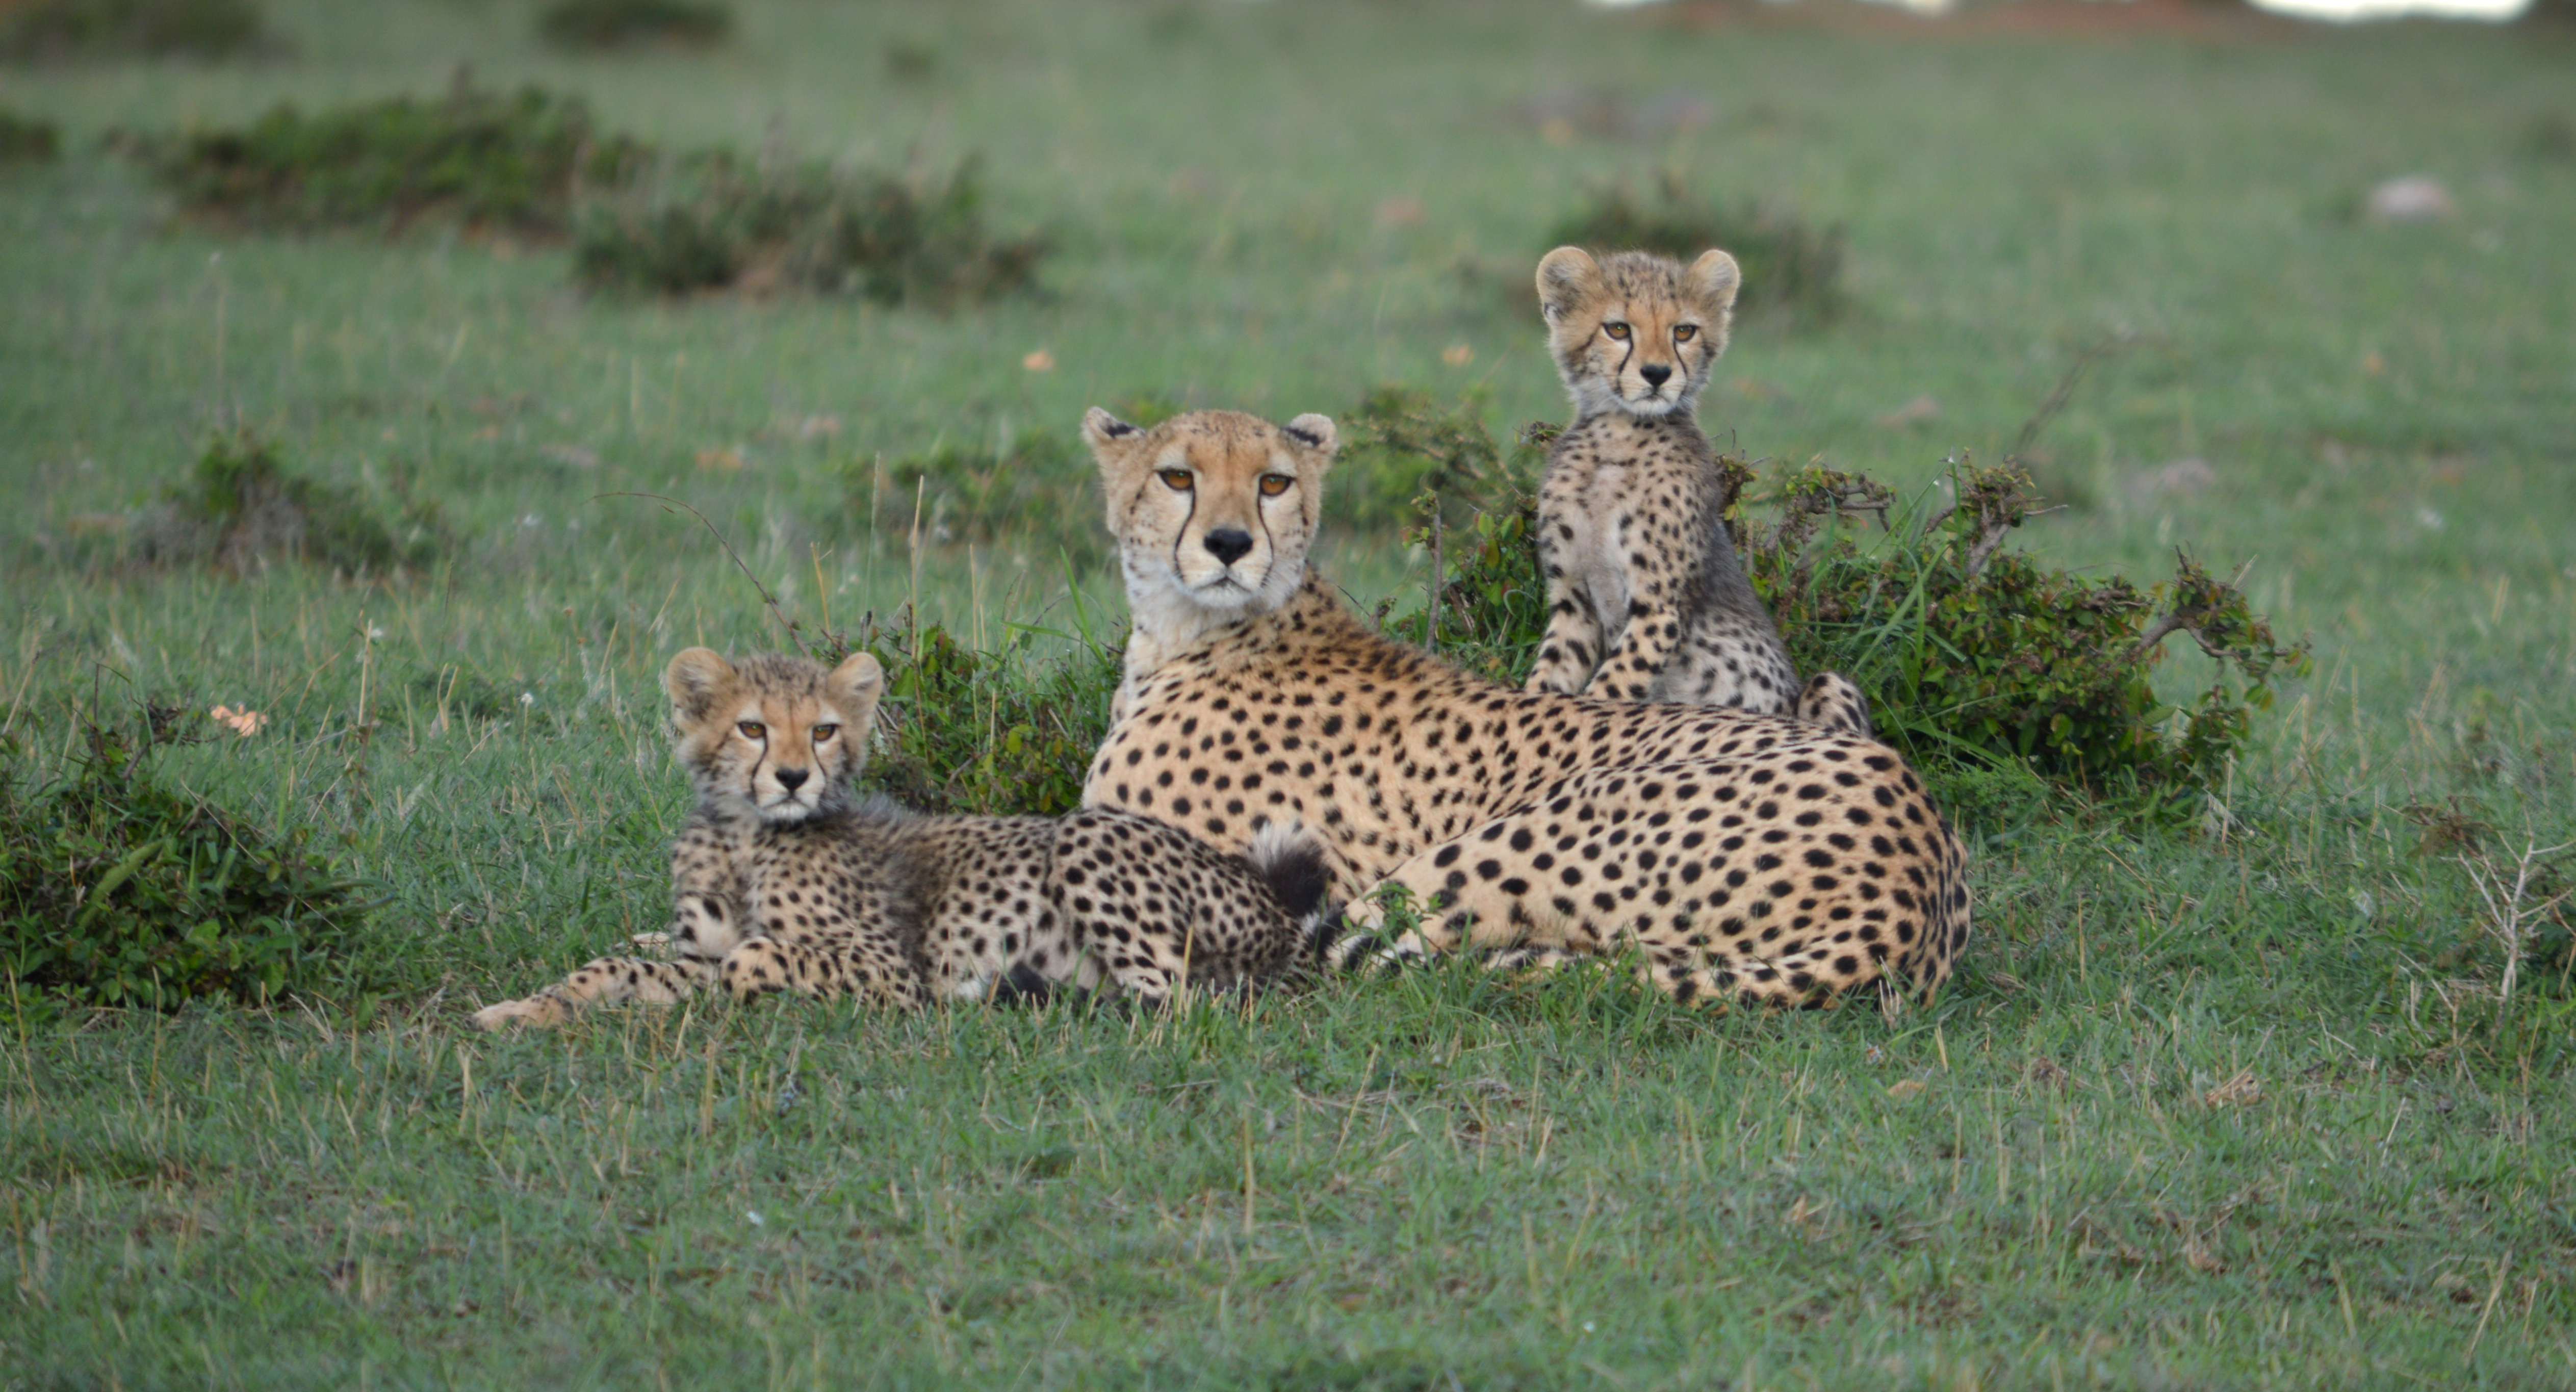 Estimates of cheetah numbers are 'guesswork', say researchers